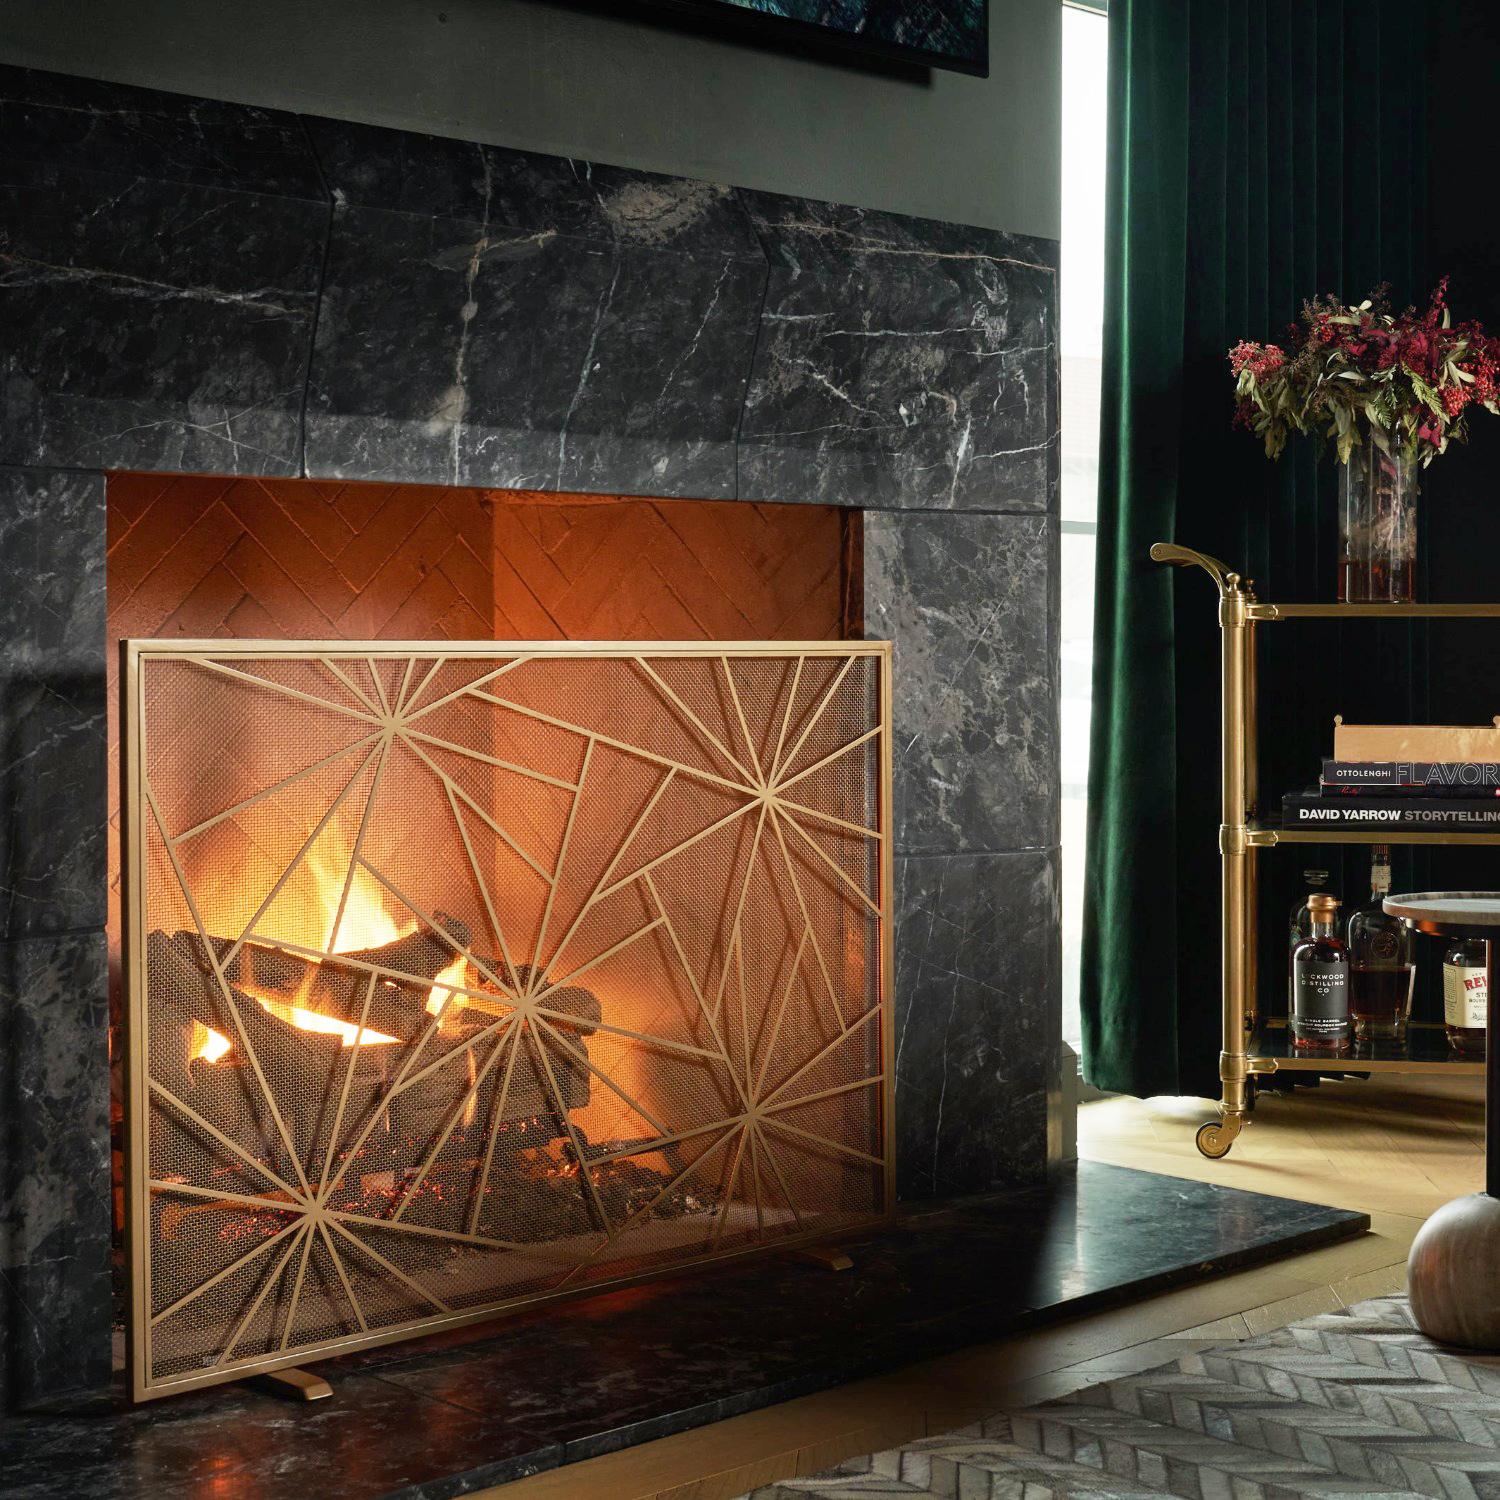 Live in your home like a star, surrounded in light. Cosmologically inspired energy radiates through this classic geometric design, elevating the atmosphere of any home. Designed and built in Texas, made with 100% solid iron bar and hand-finished to